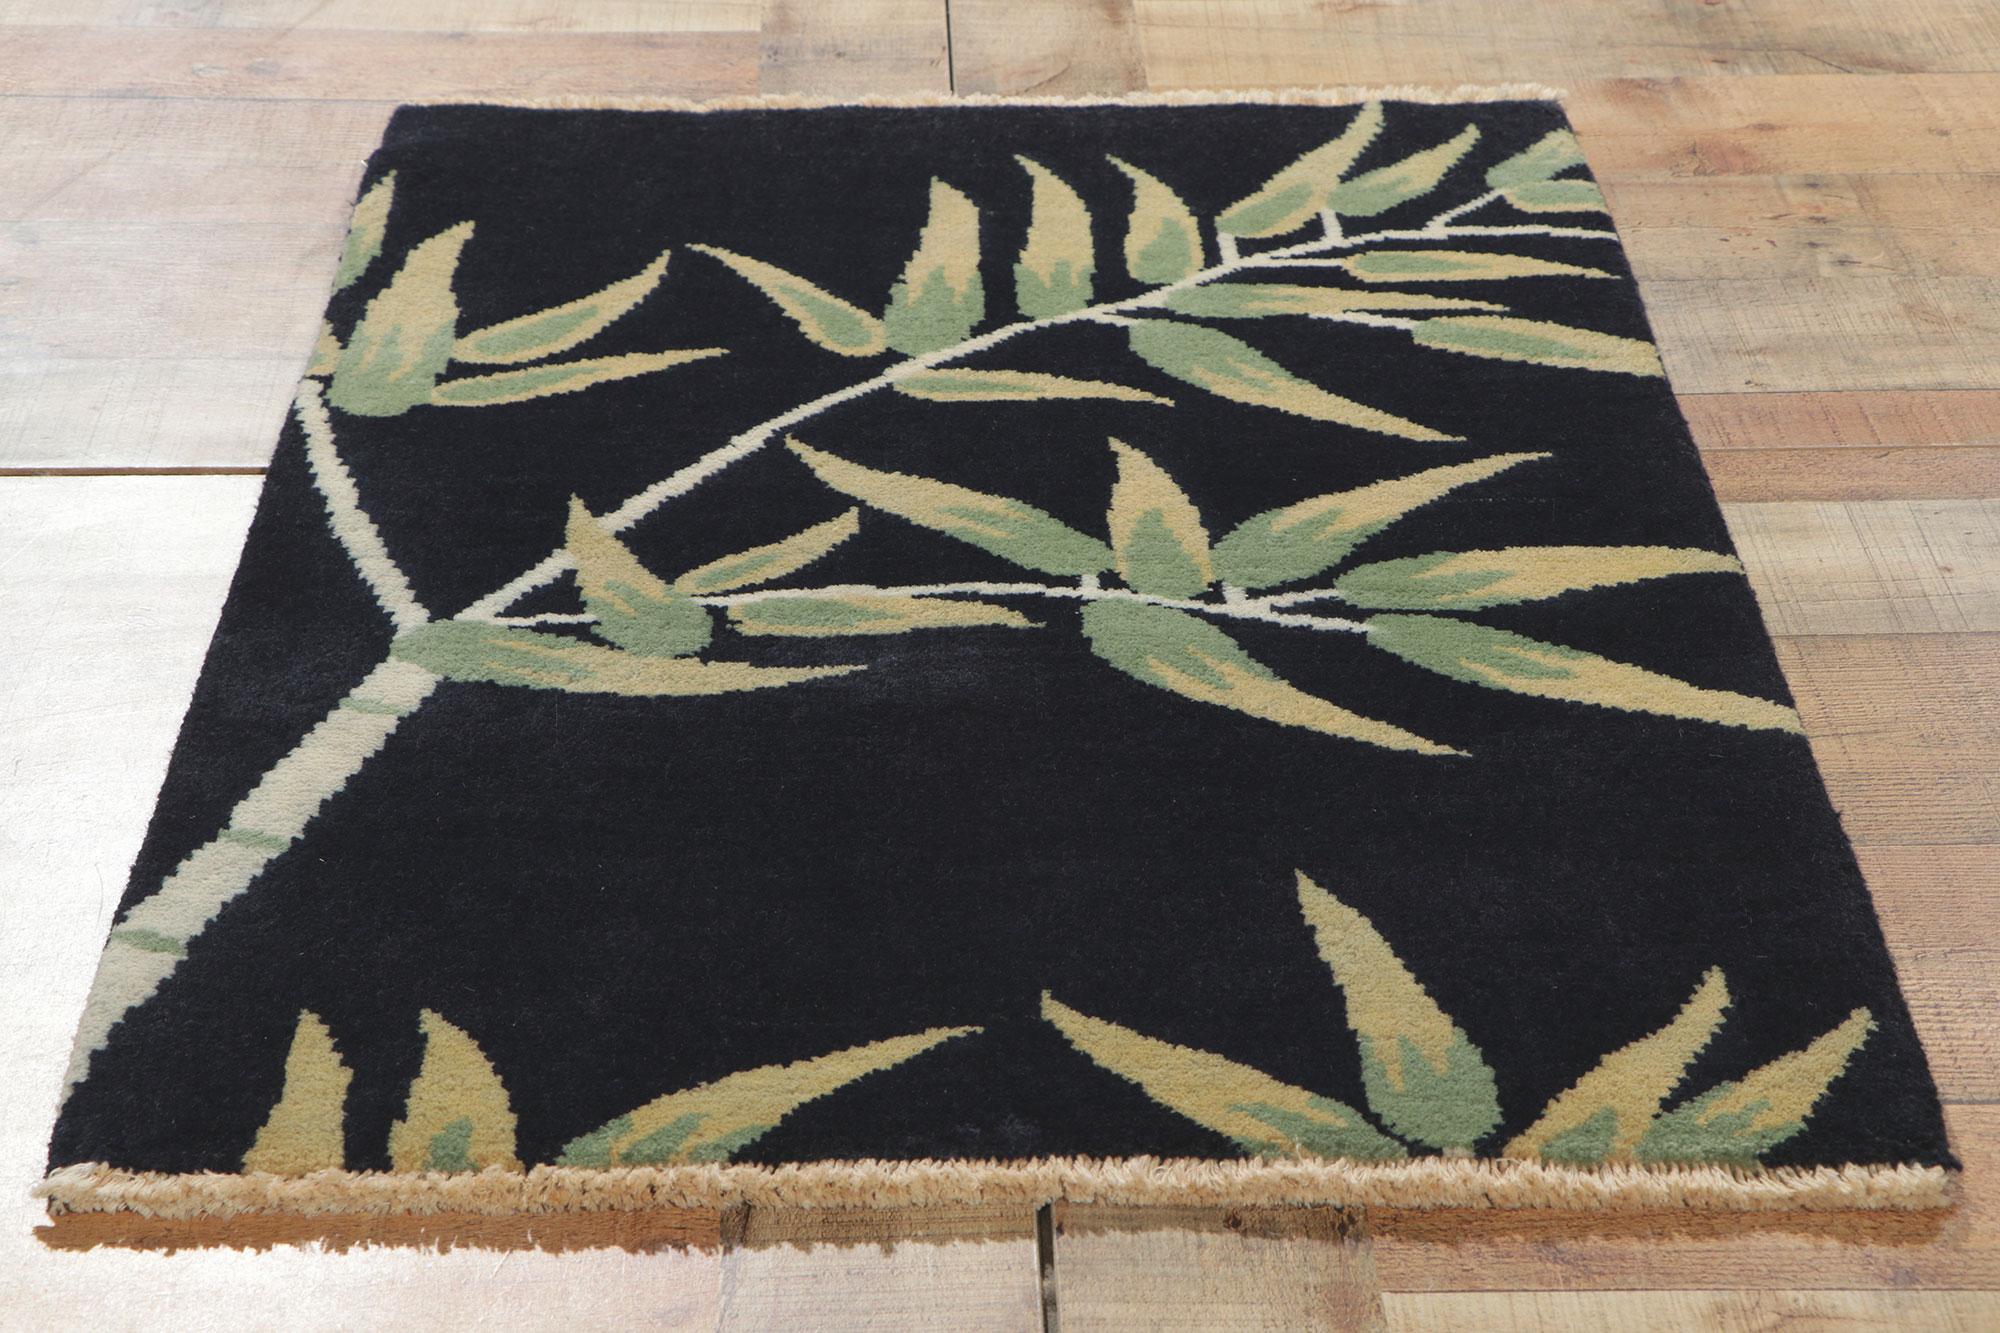 New Chinese Art Deco style rug set of 6. Showcasing a unique bamboo design, incredible detail and texture, this hand-knotted wool Chinese Art Deco style rug is a captivating vision of woven beauty. The landscape pictorial and sultry colorway woven